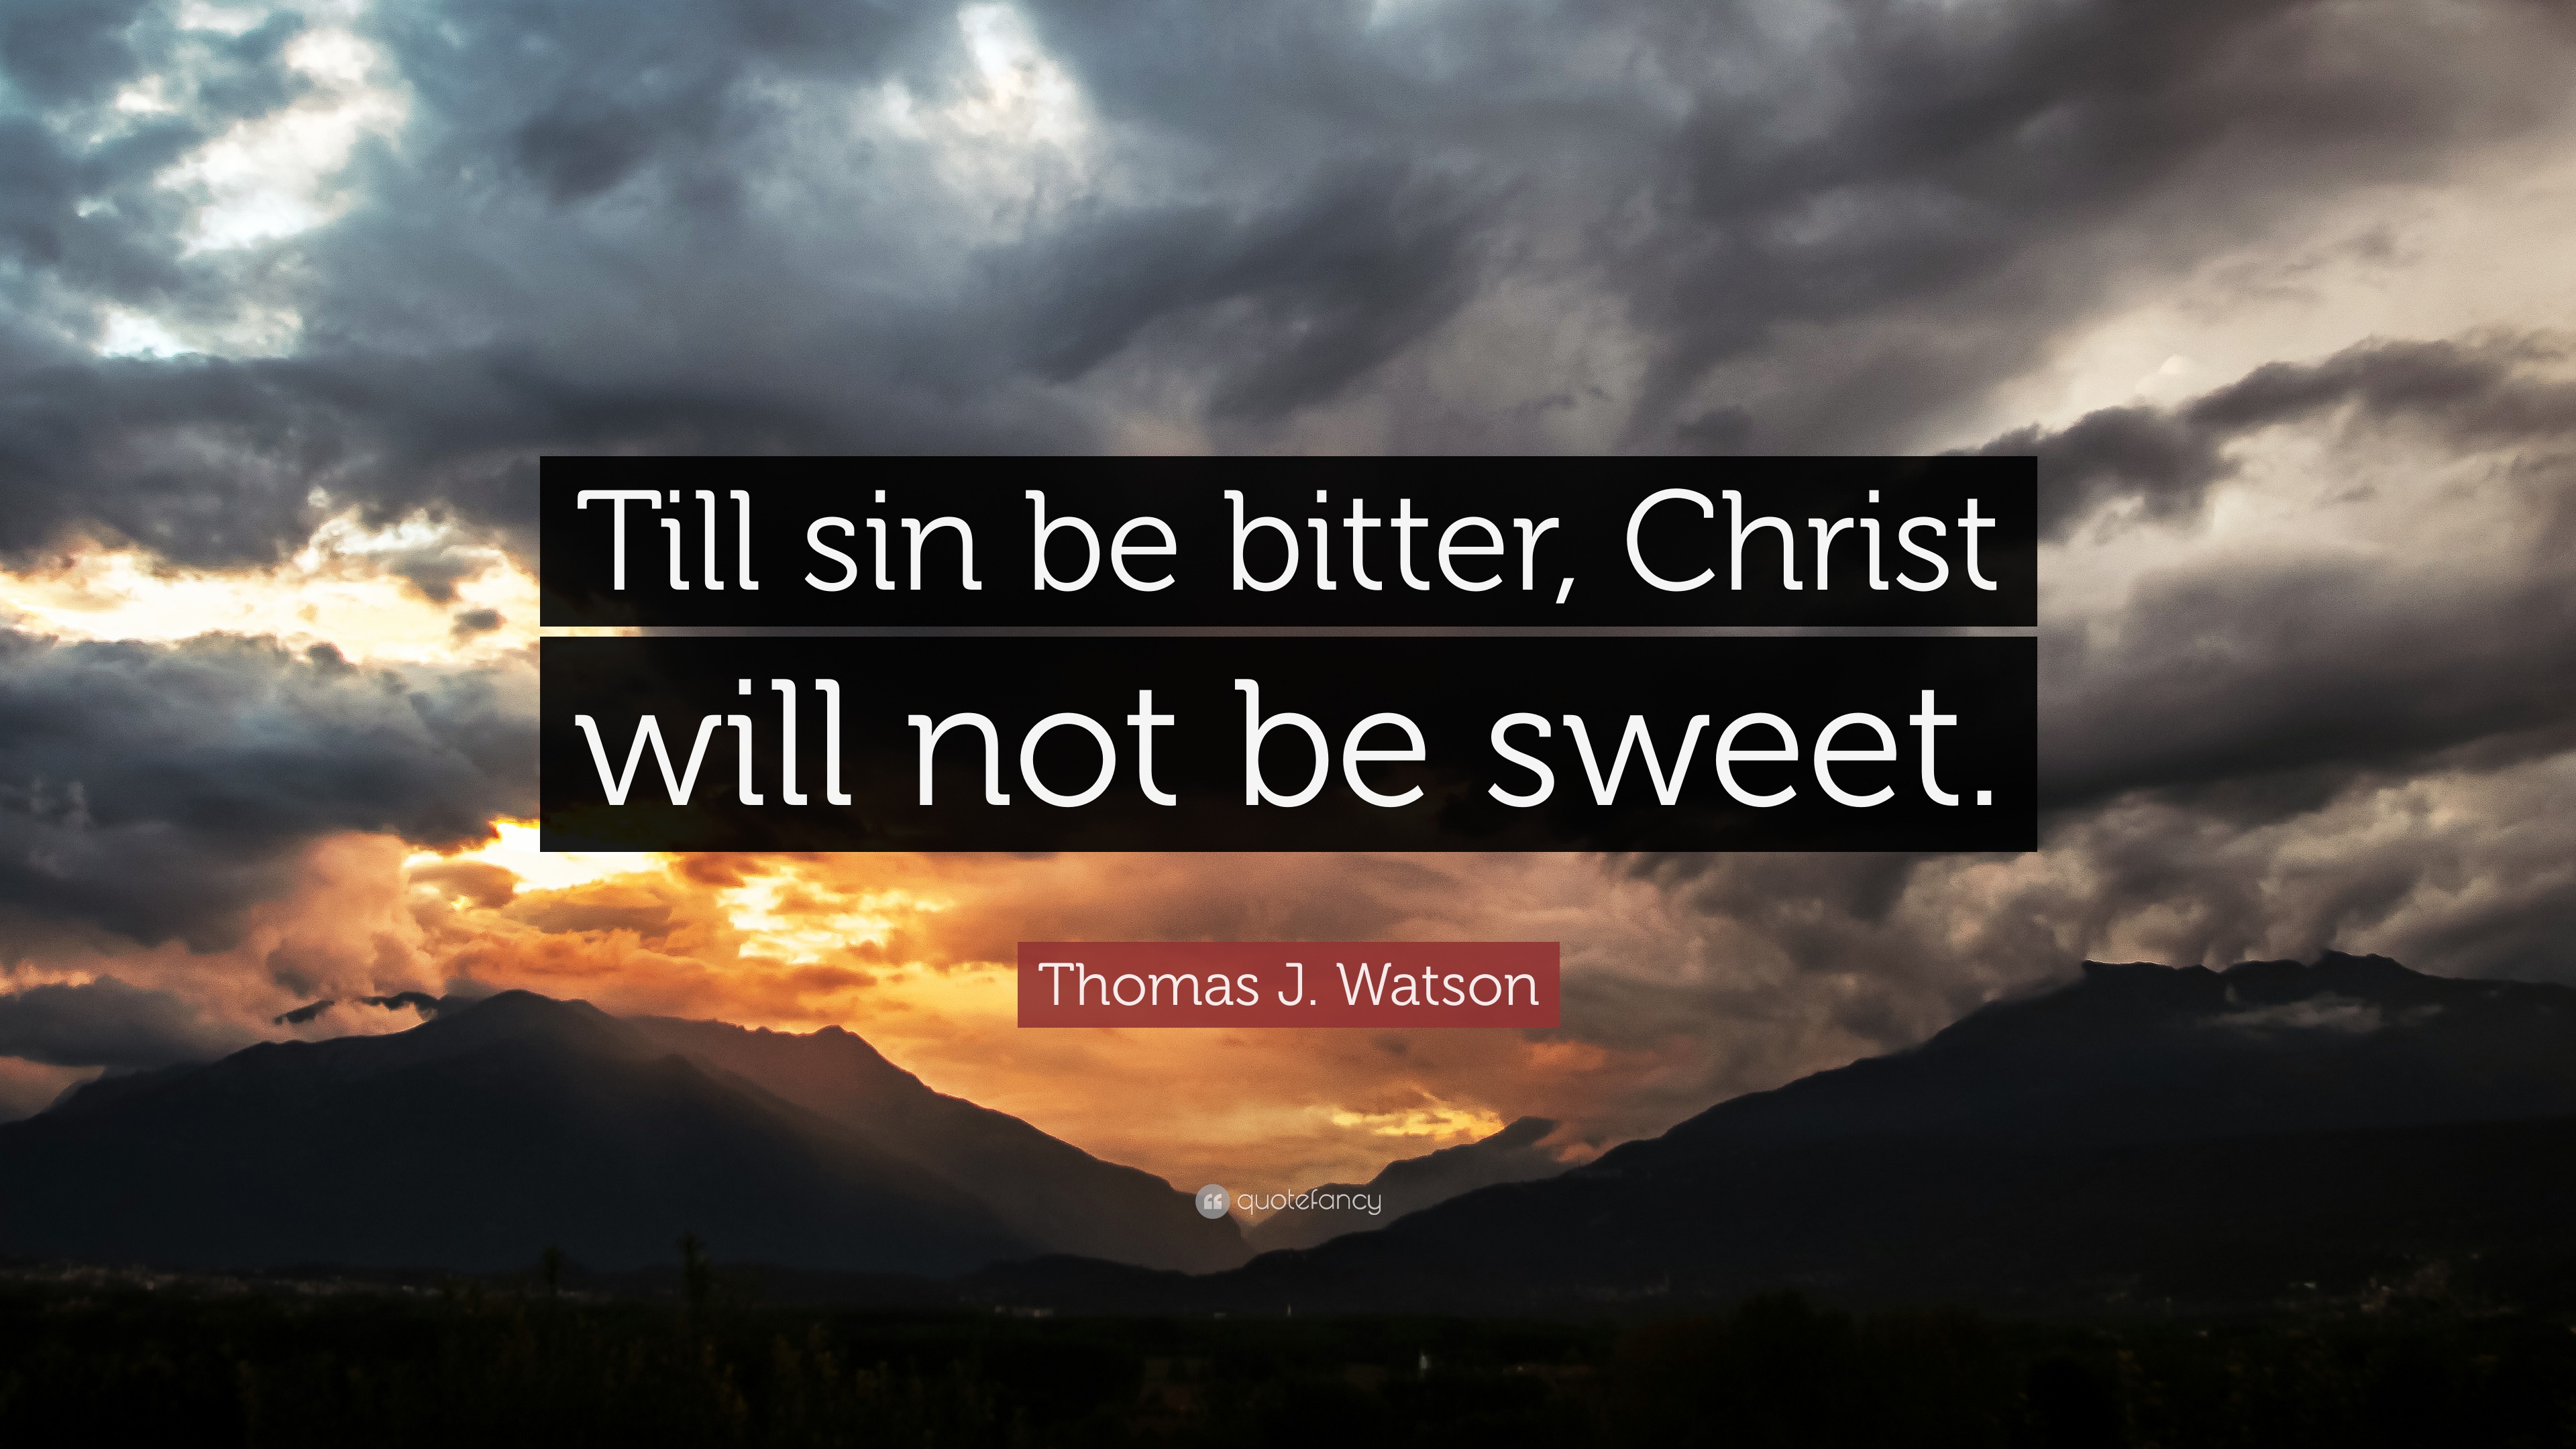 Thomas J. Watson Quote: “Till sin be bitter, Christ will not be sweet.”